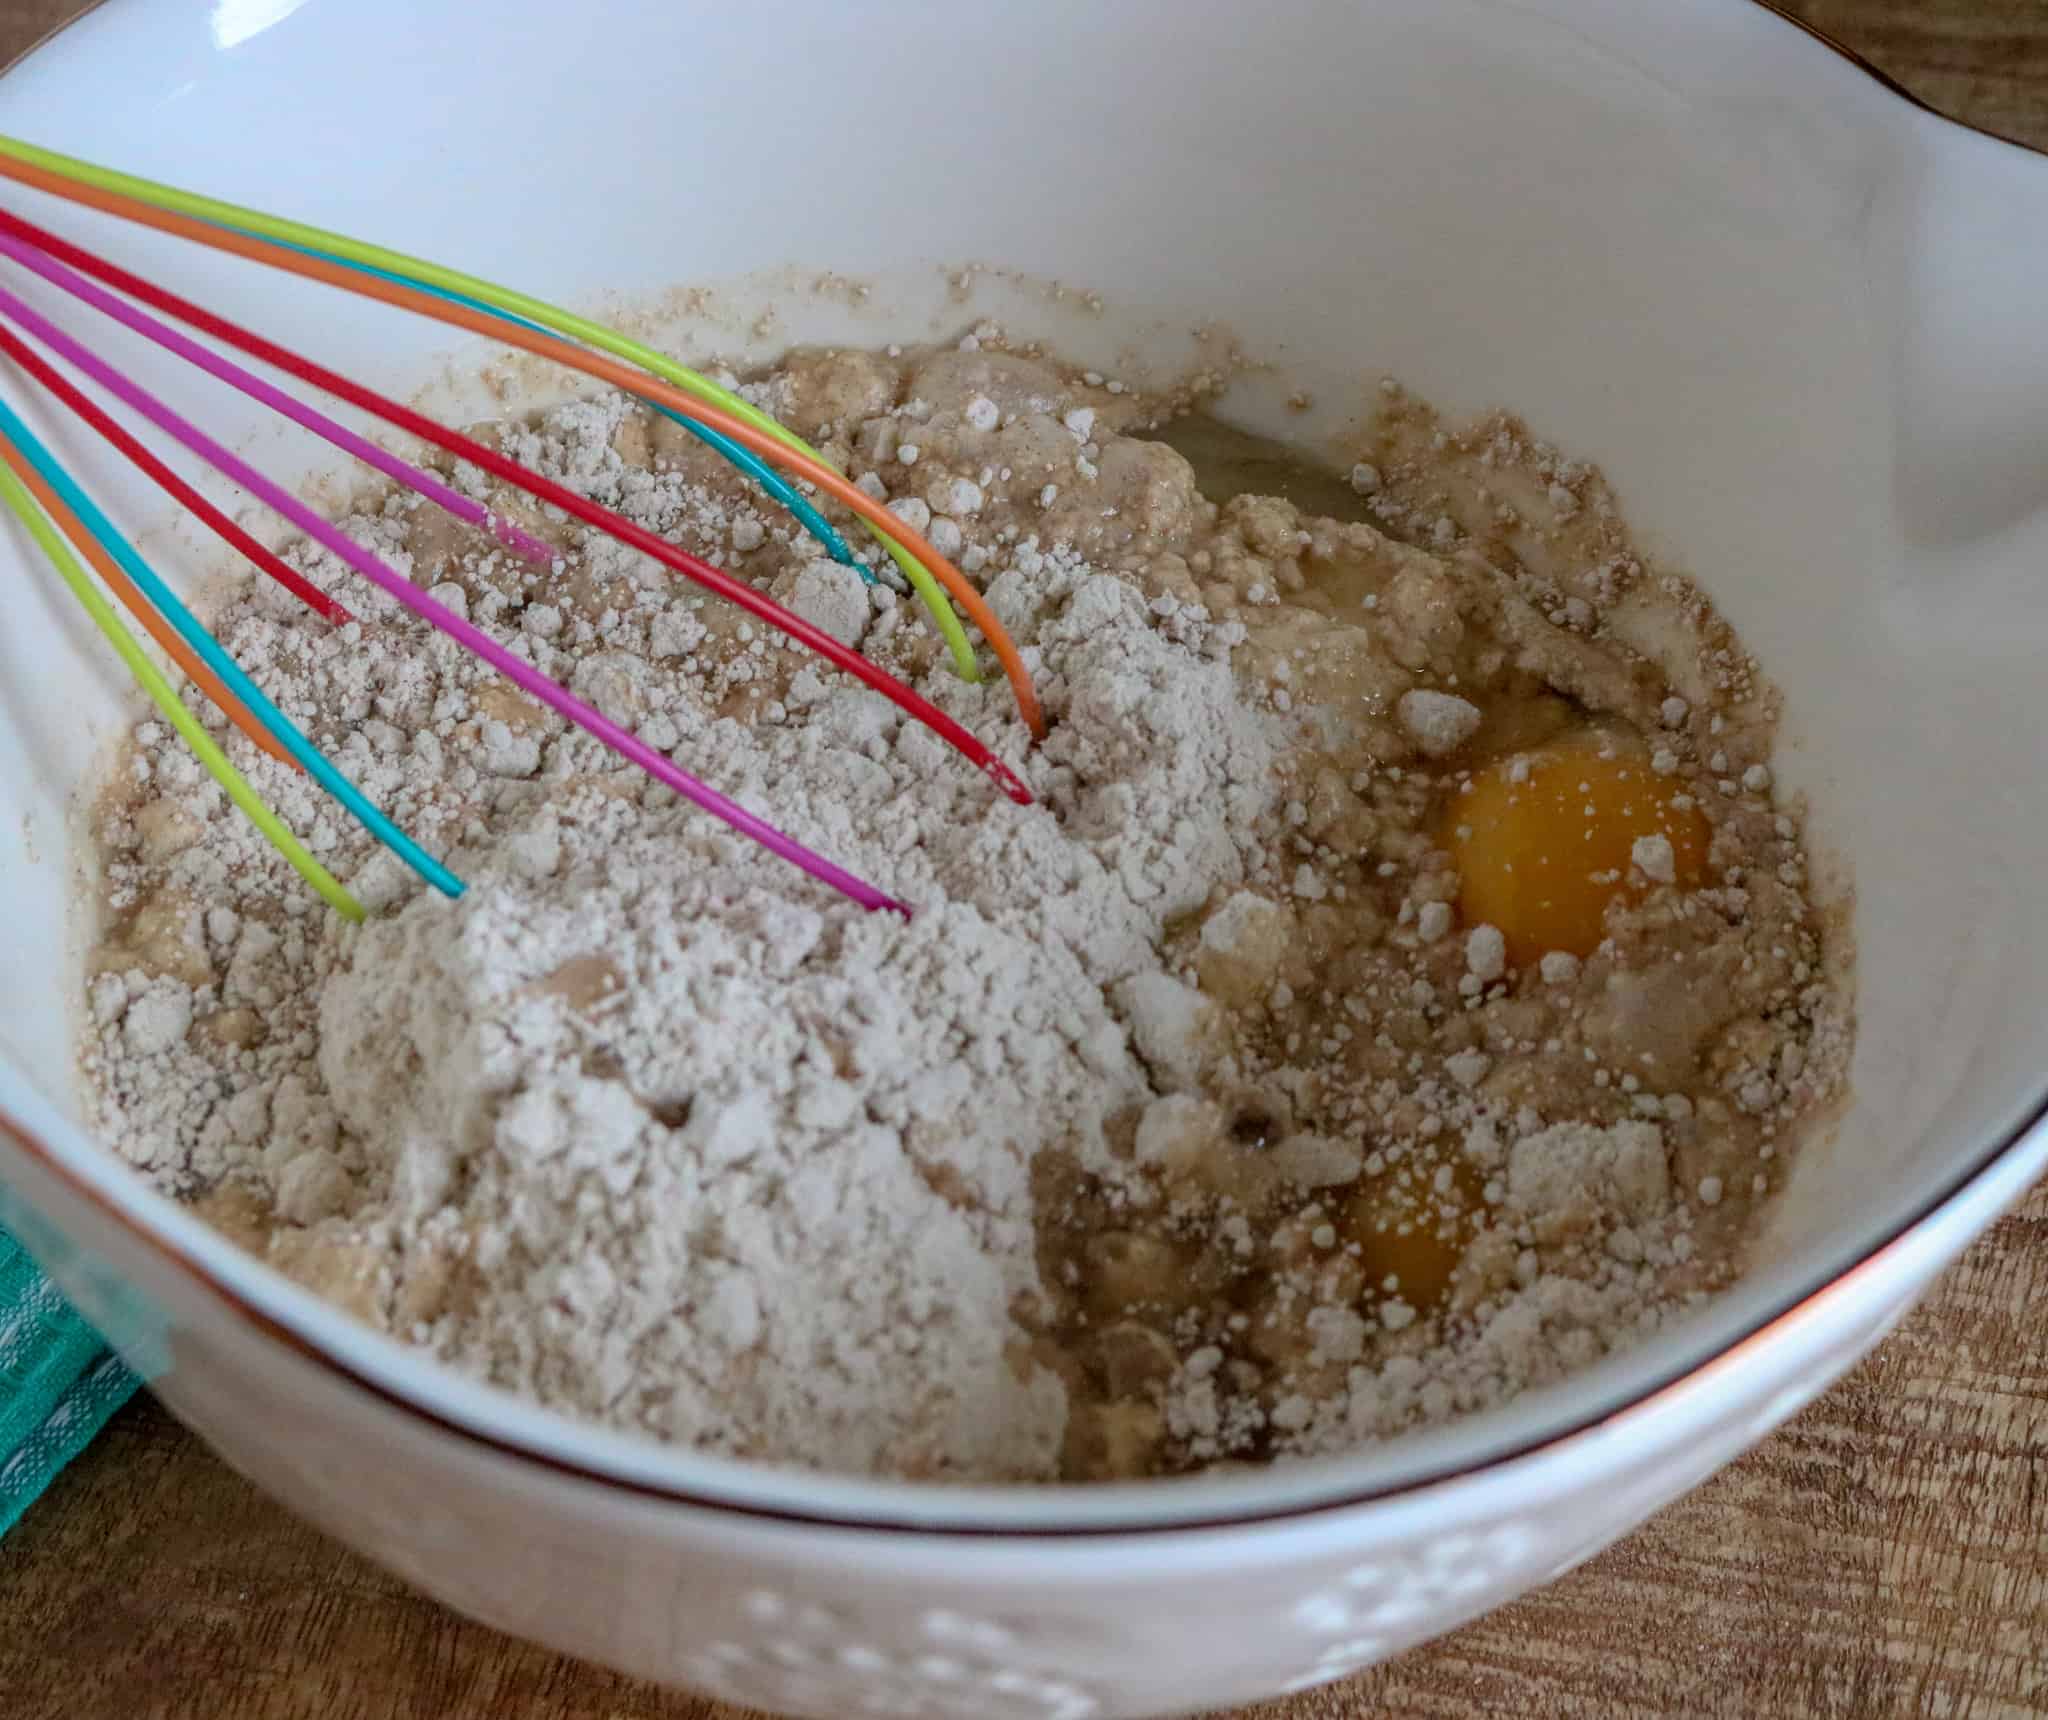 Spice cake mix, eggs, water and vegetable oil in a bowl being mixed with a whisk.